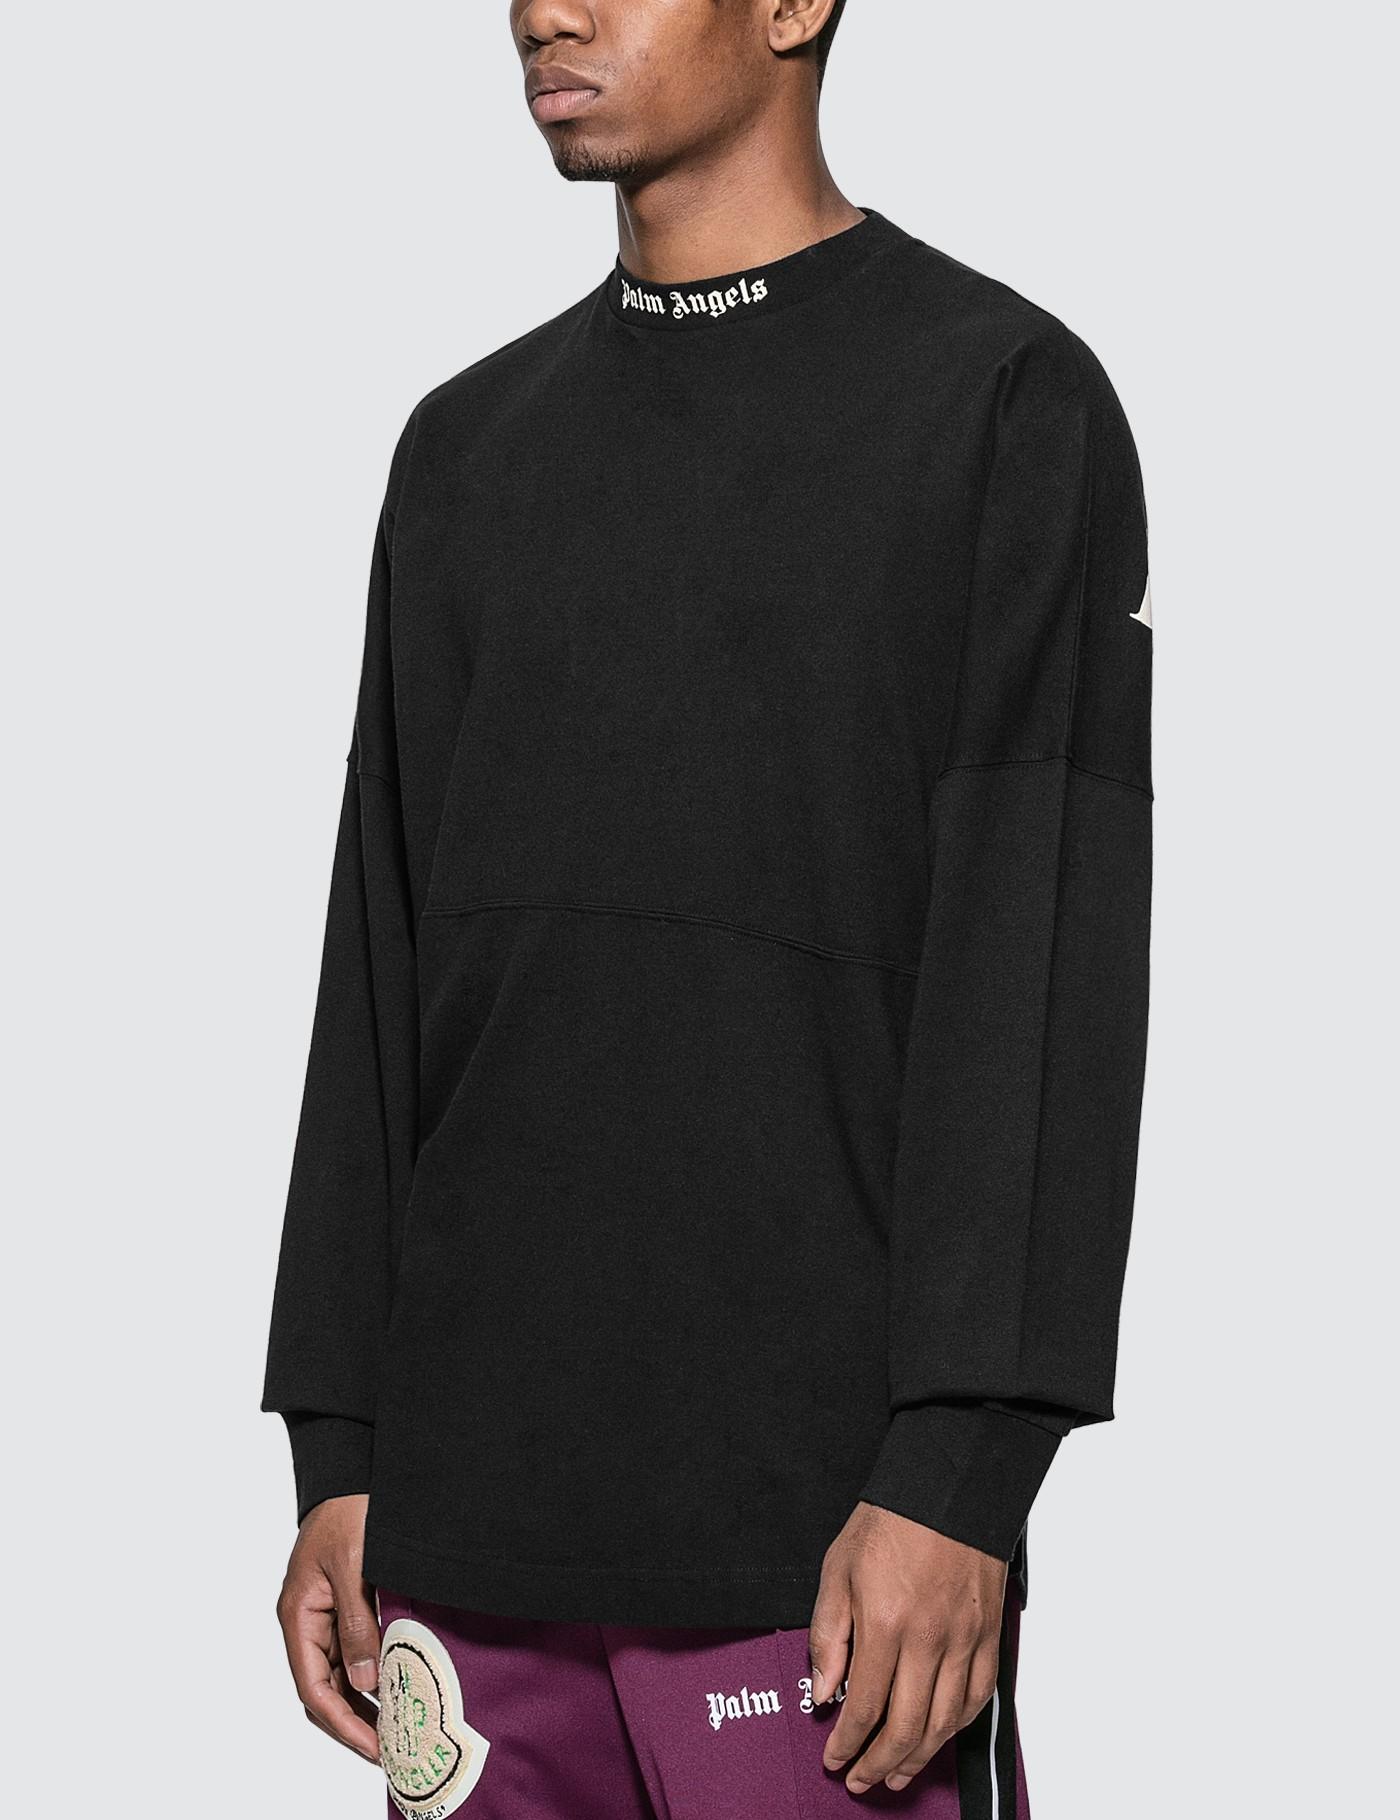 Palm Angels Cotton Logo Over Long Sleeve T-shirt in Black for Men - Lyst